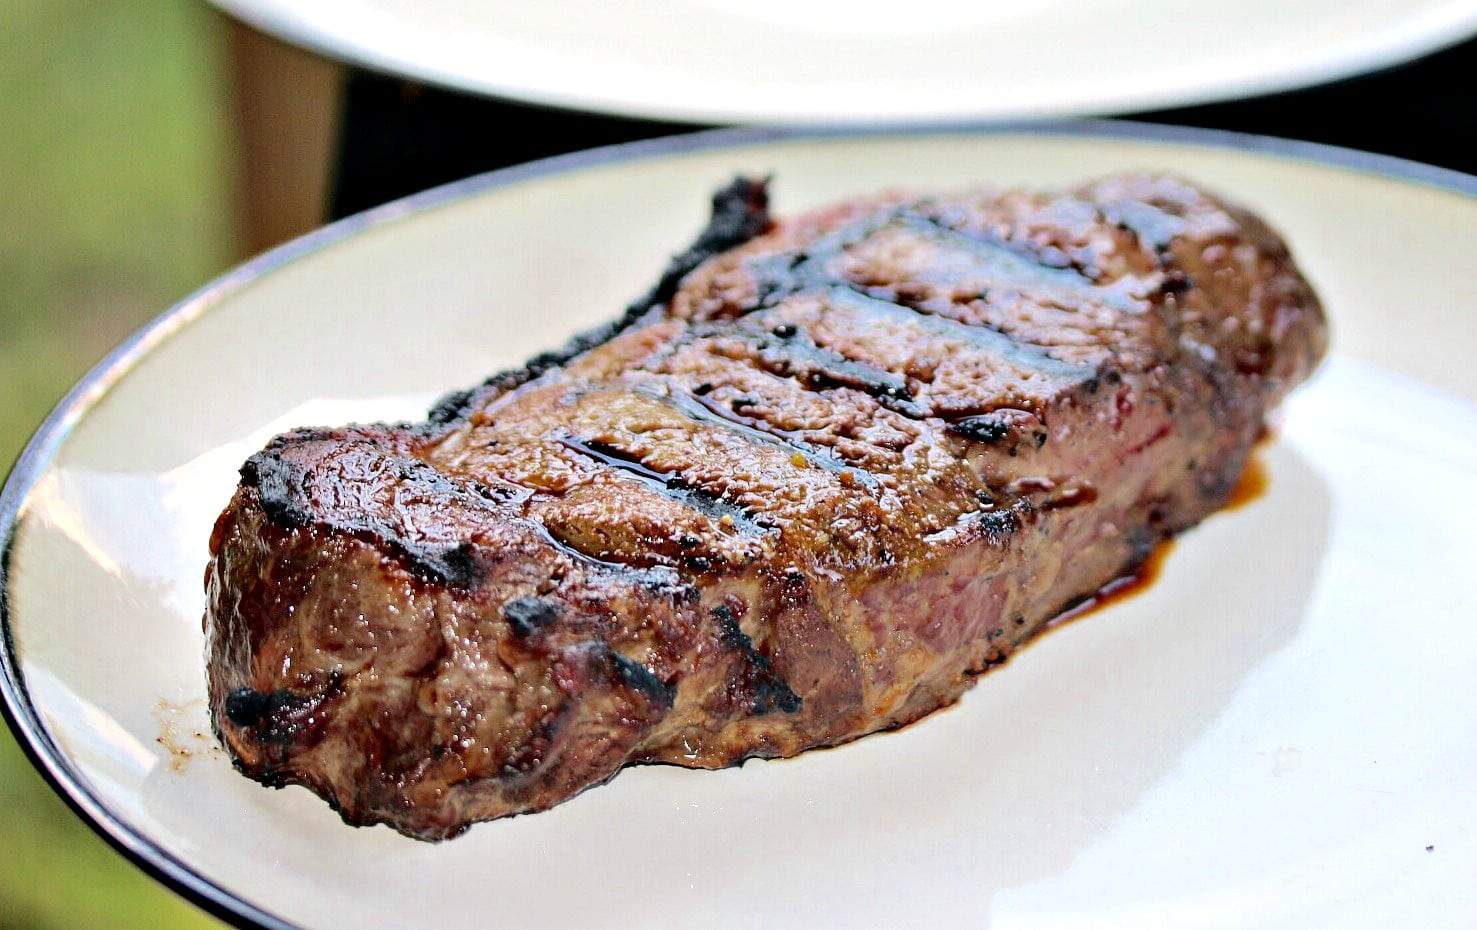 A grilled steak resting on a white plate after being cooked.